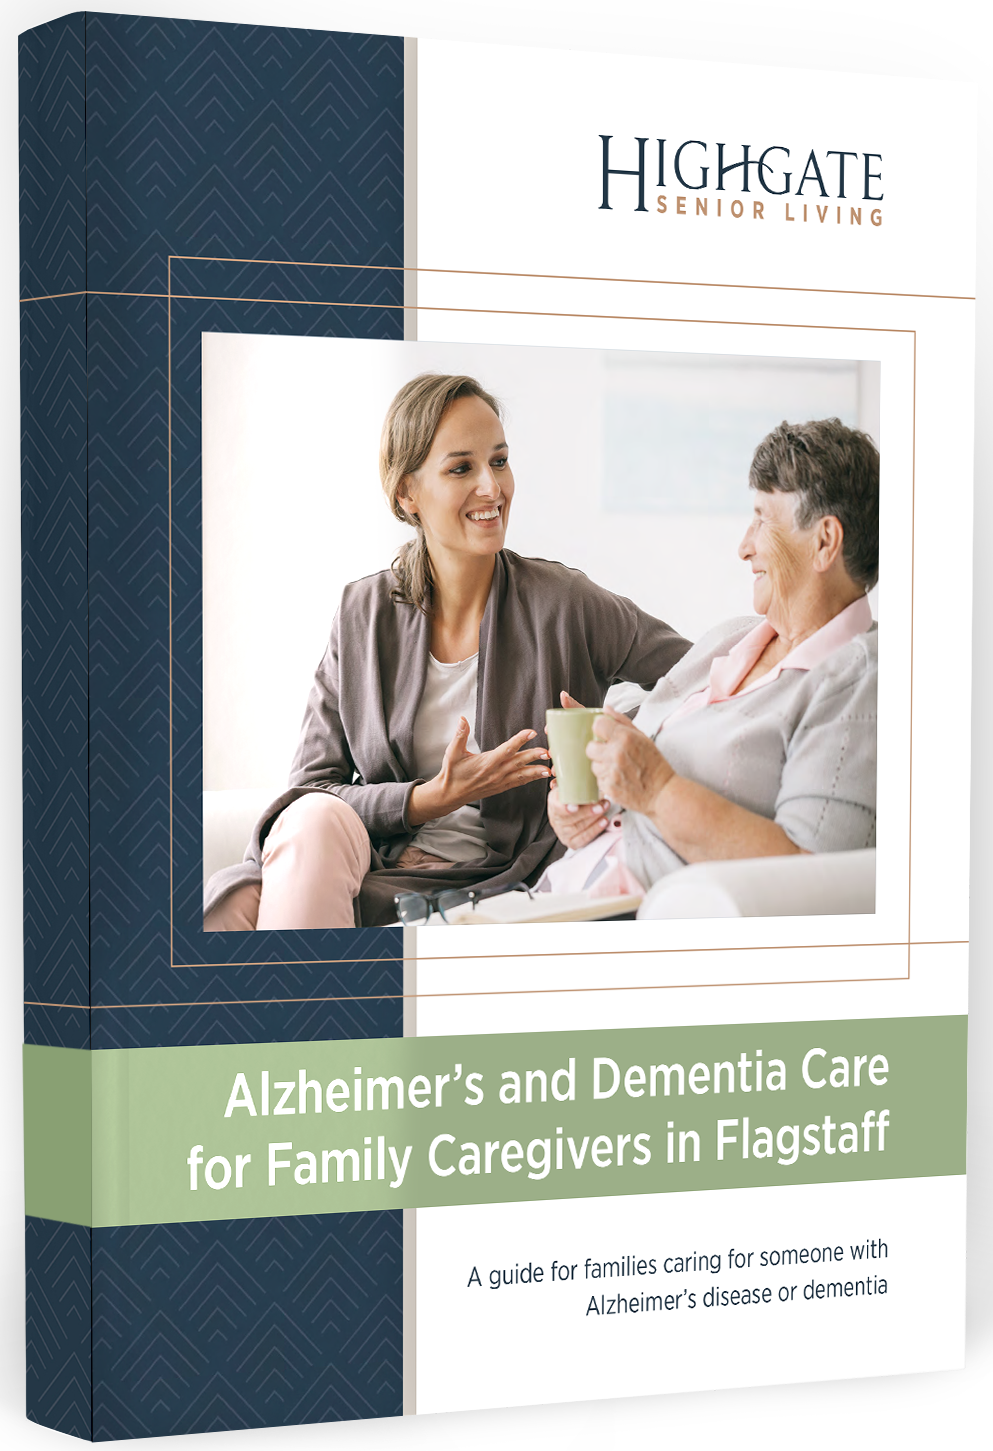 Alzheimer's and Dementia Care for Family Caregivers in Flagstaff